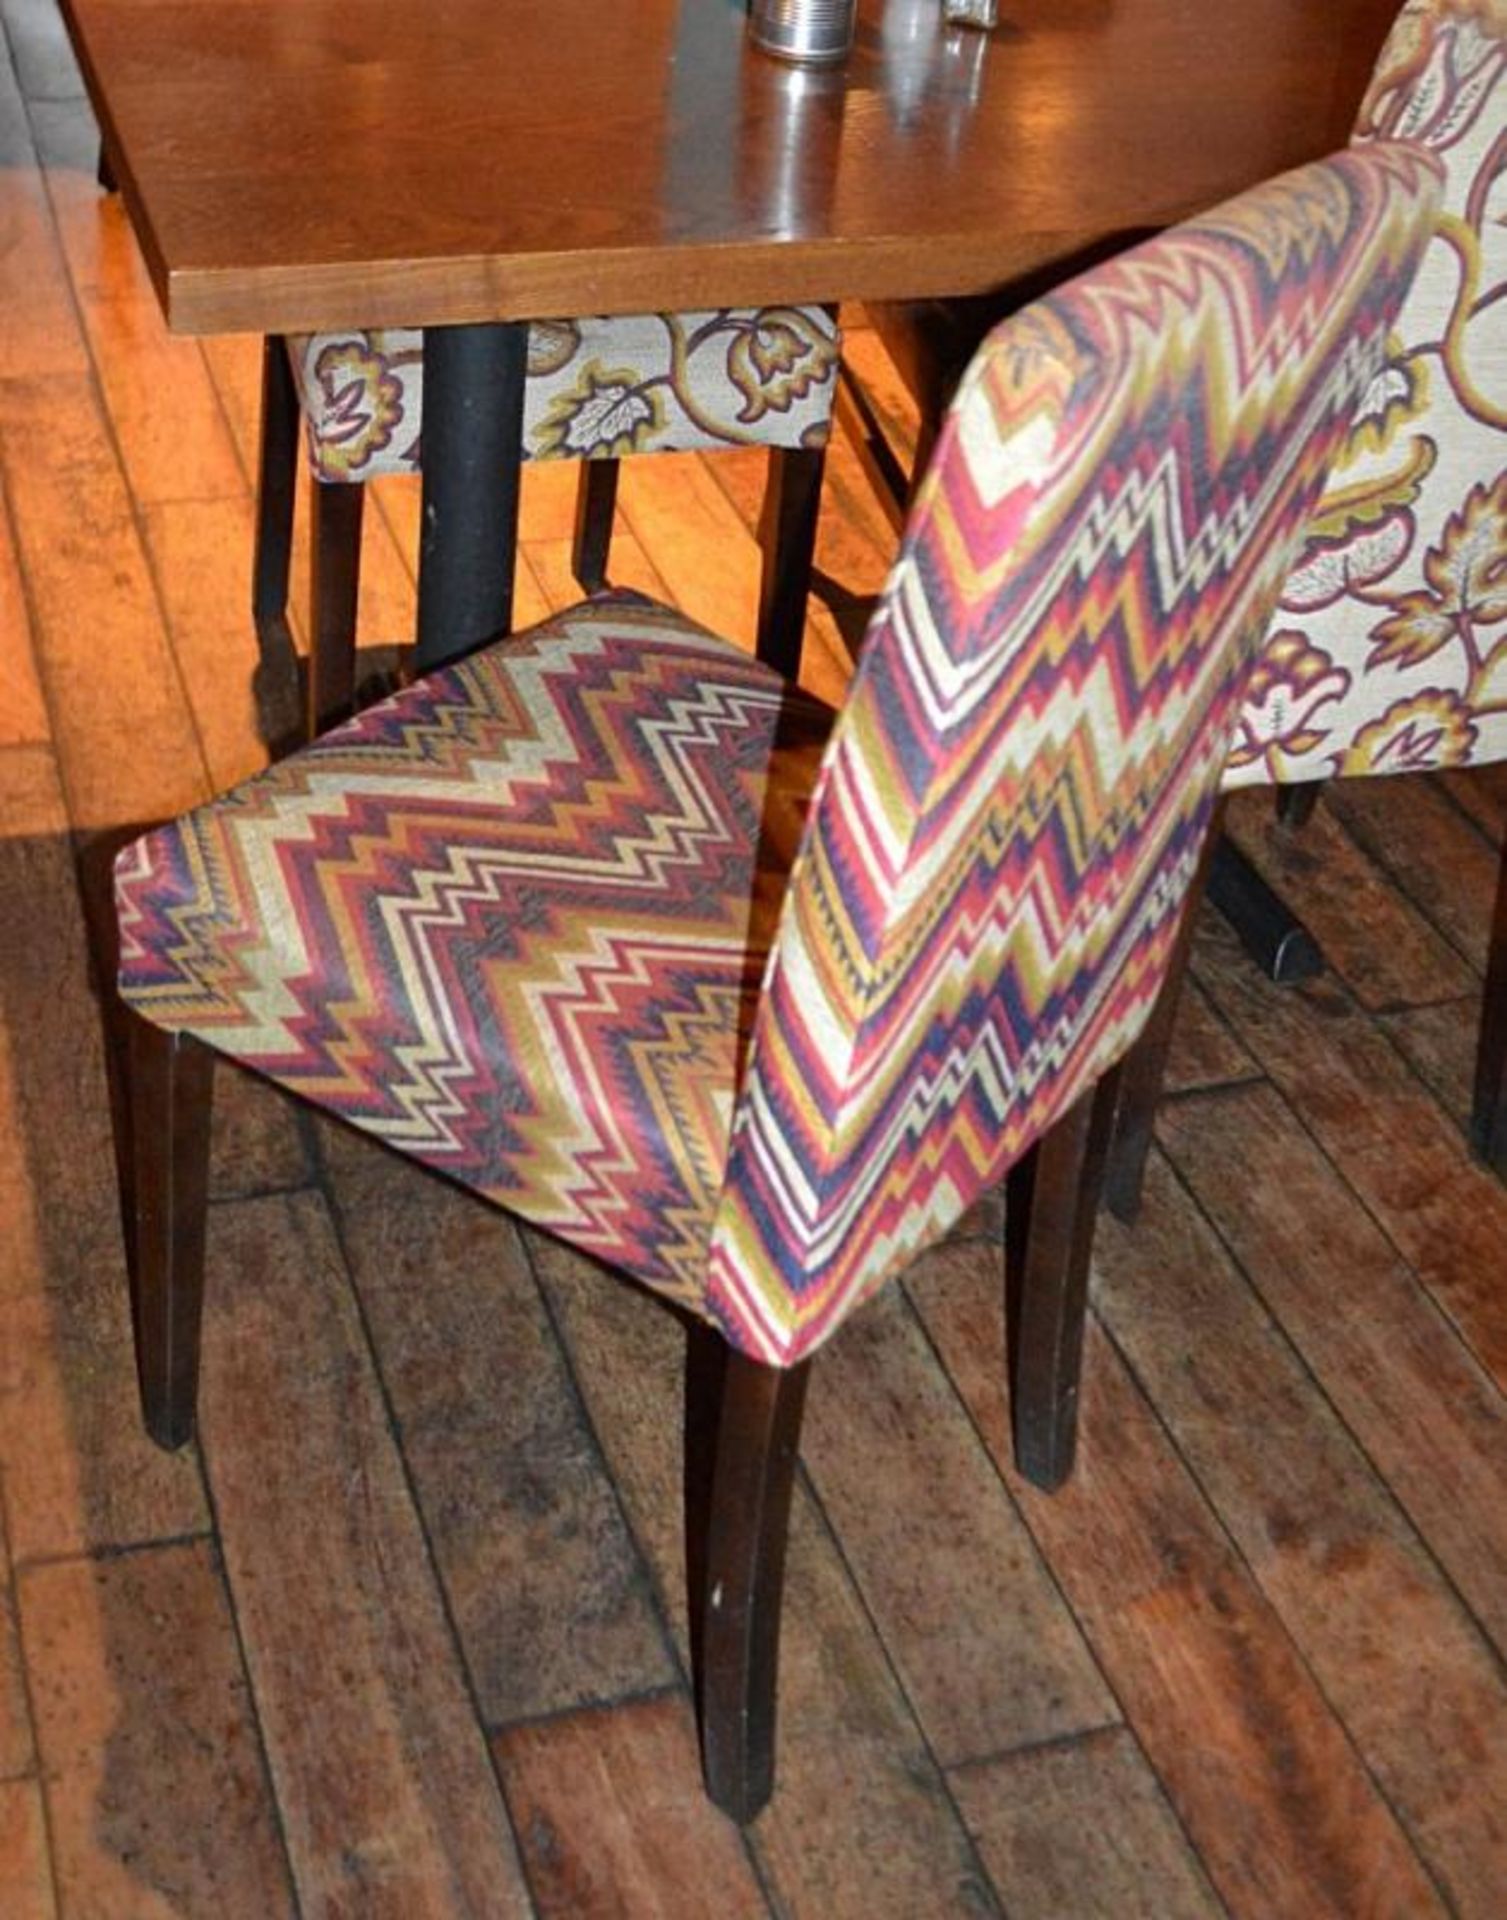 7 x Upholstered Restaurant Dining Chairs In A Zig Zag Mexican-style Fabric - Image 2 of 2